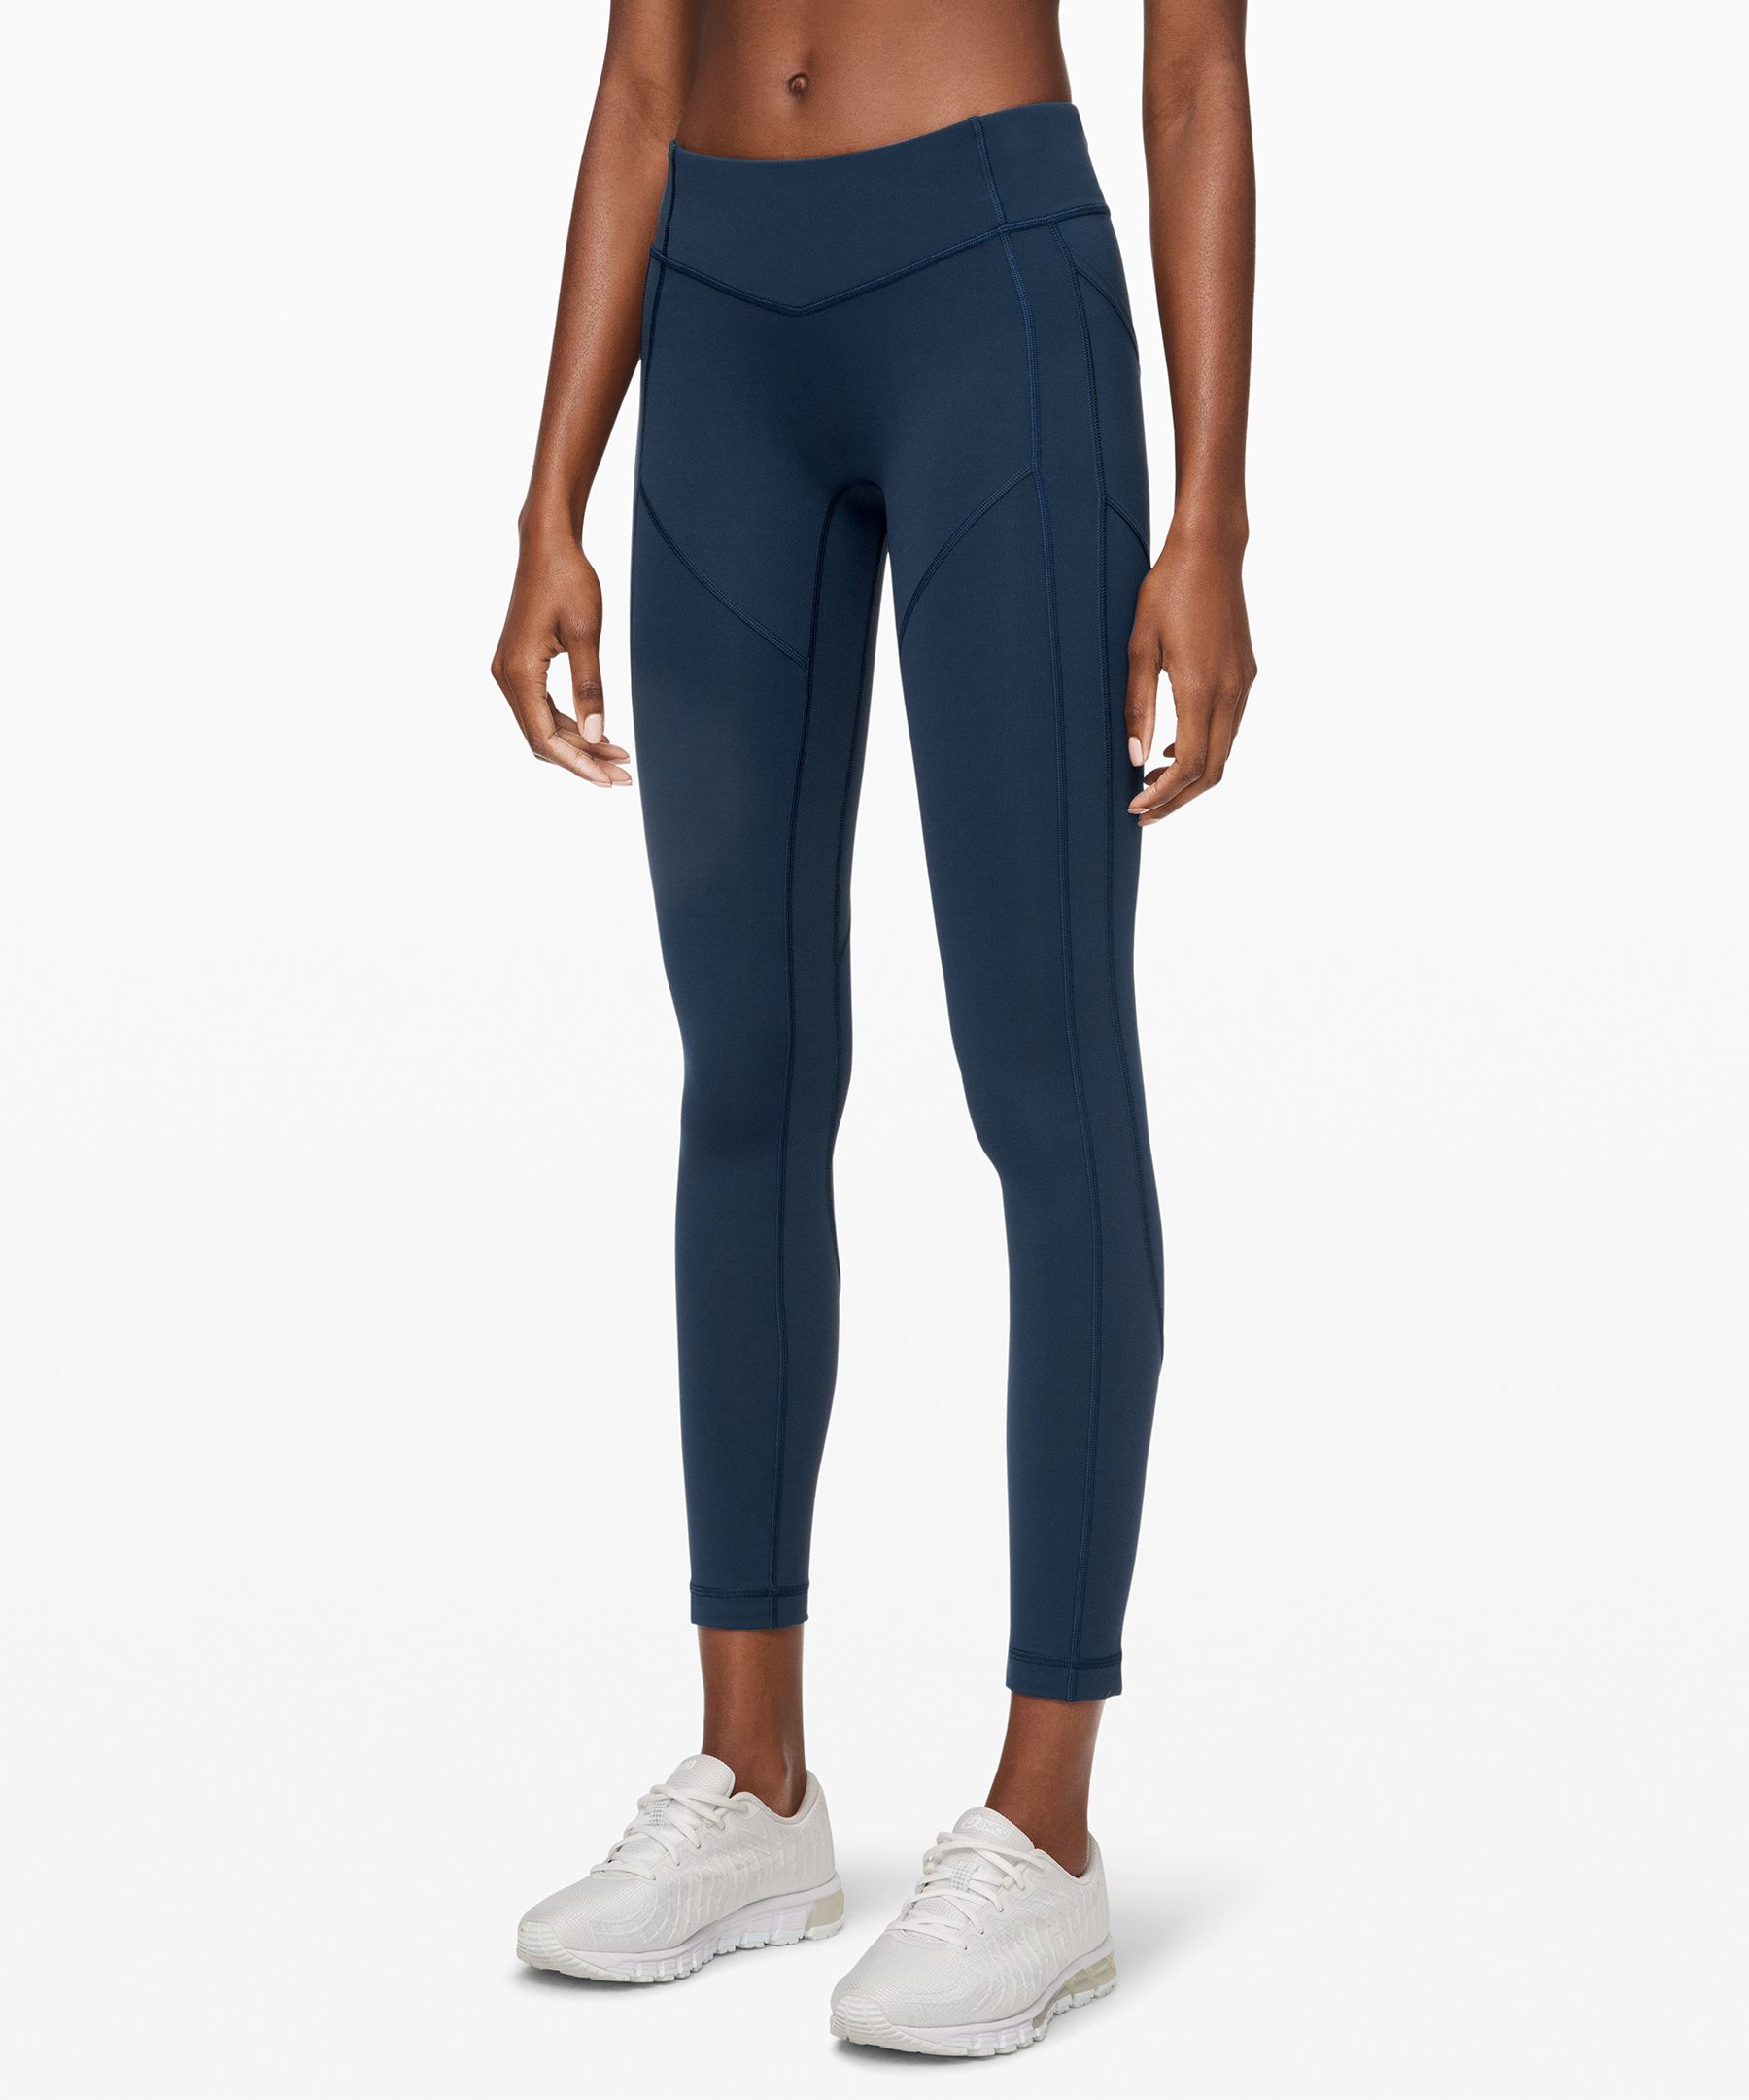 Lululemon All The Right Places Pant Ii Low Rise *28 Online Only In Black